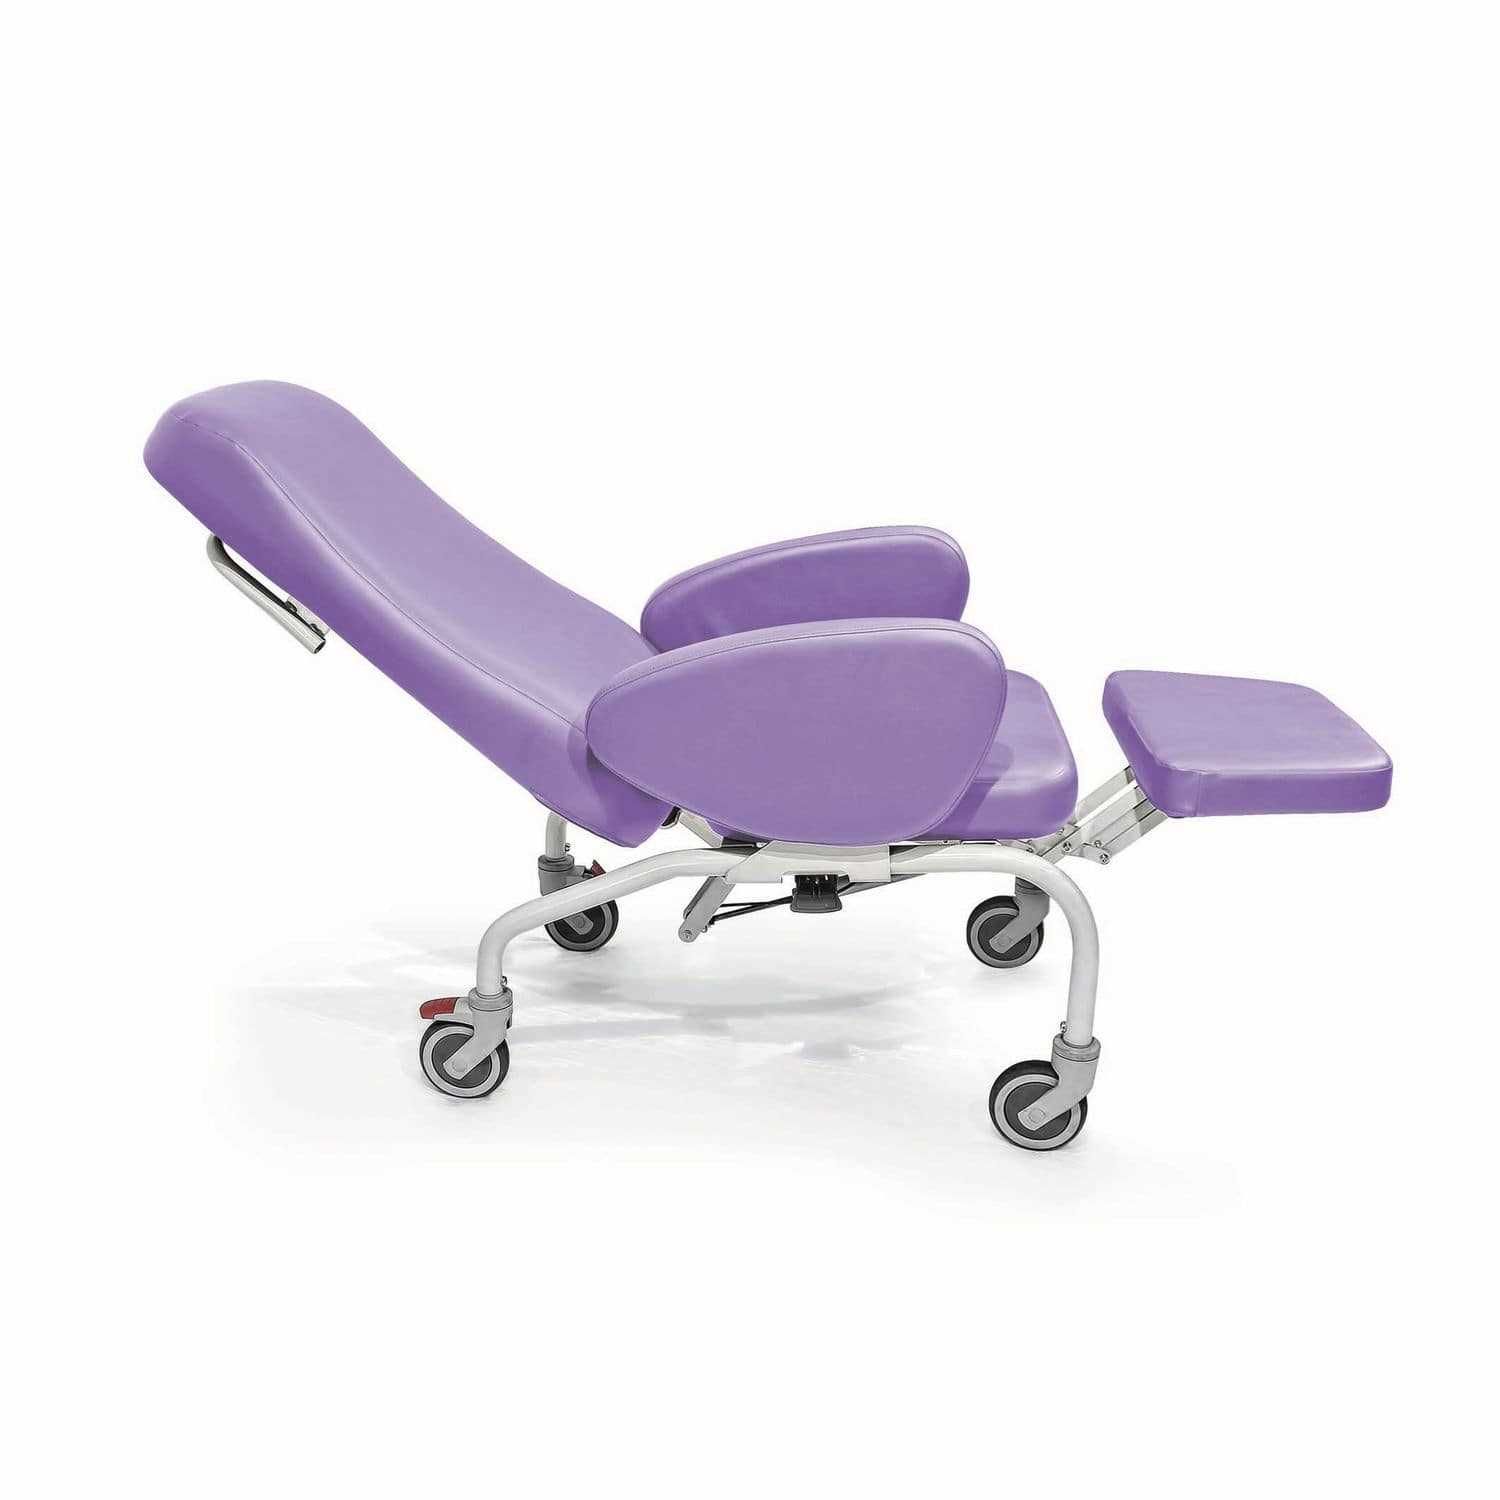 Reclining patient chair